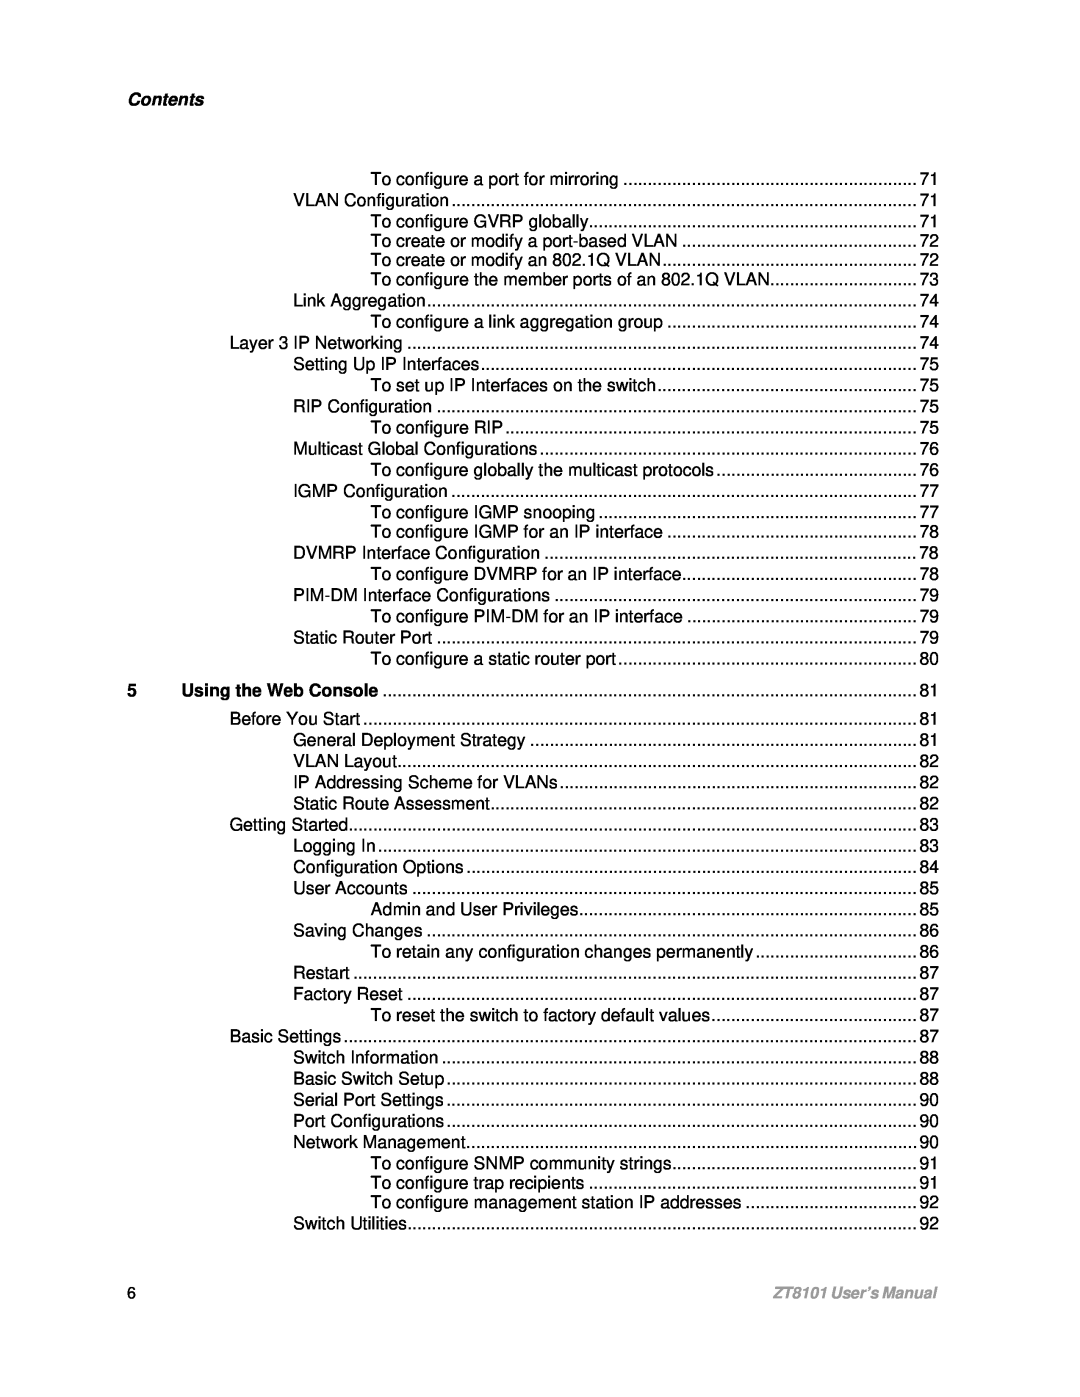 Intel ZT8101 user manual Contents, To configure a port for mirroring 